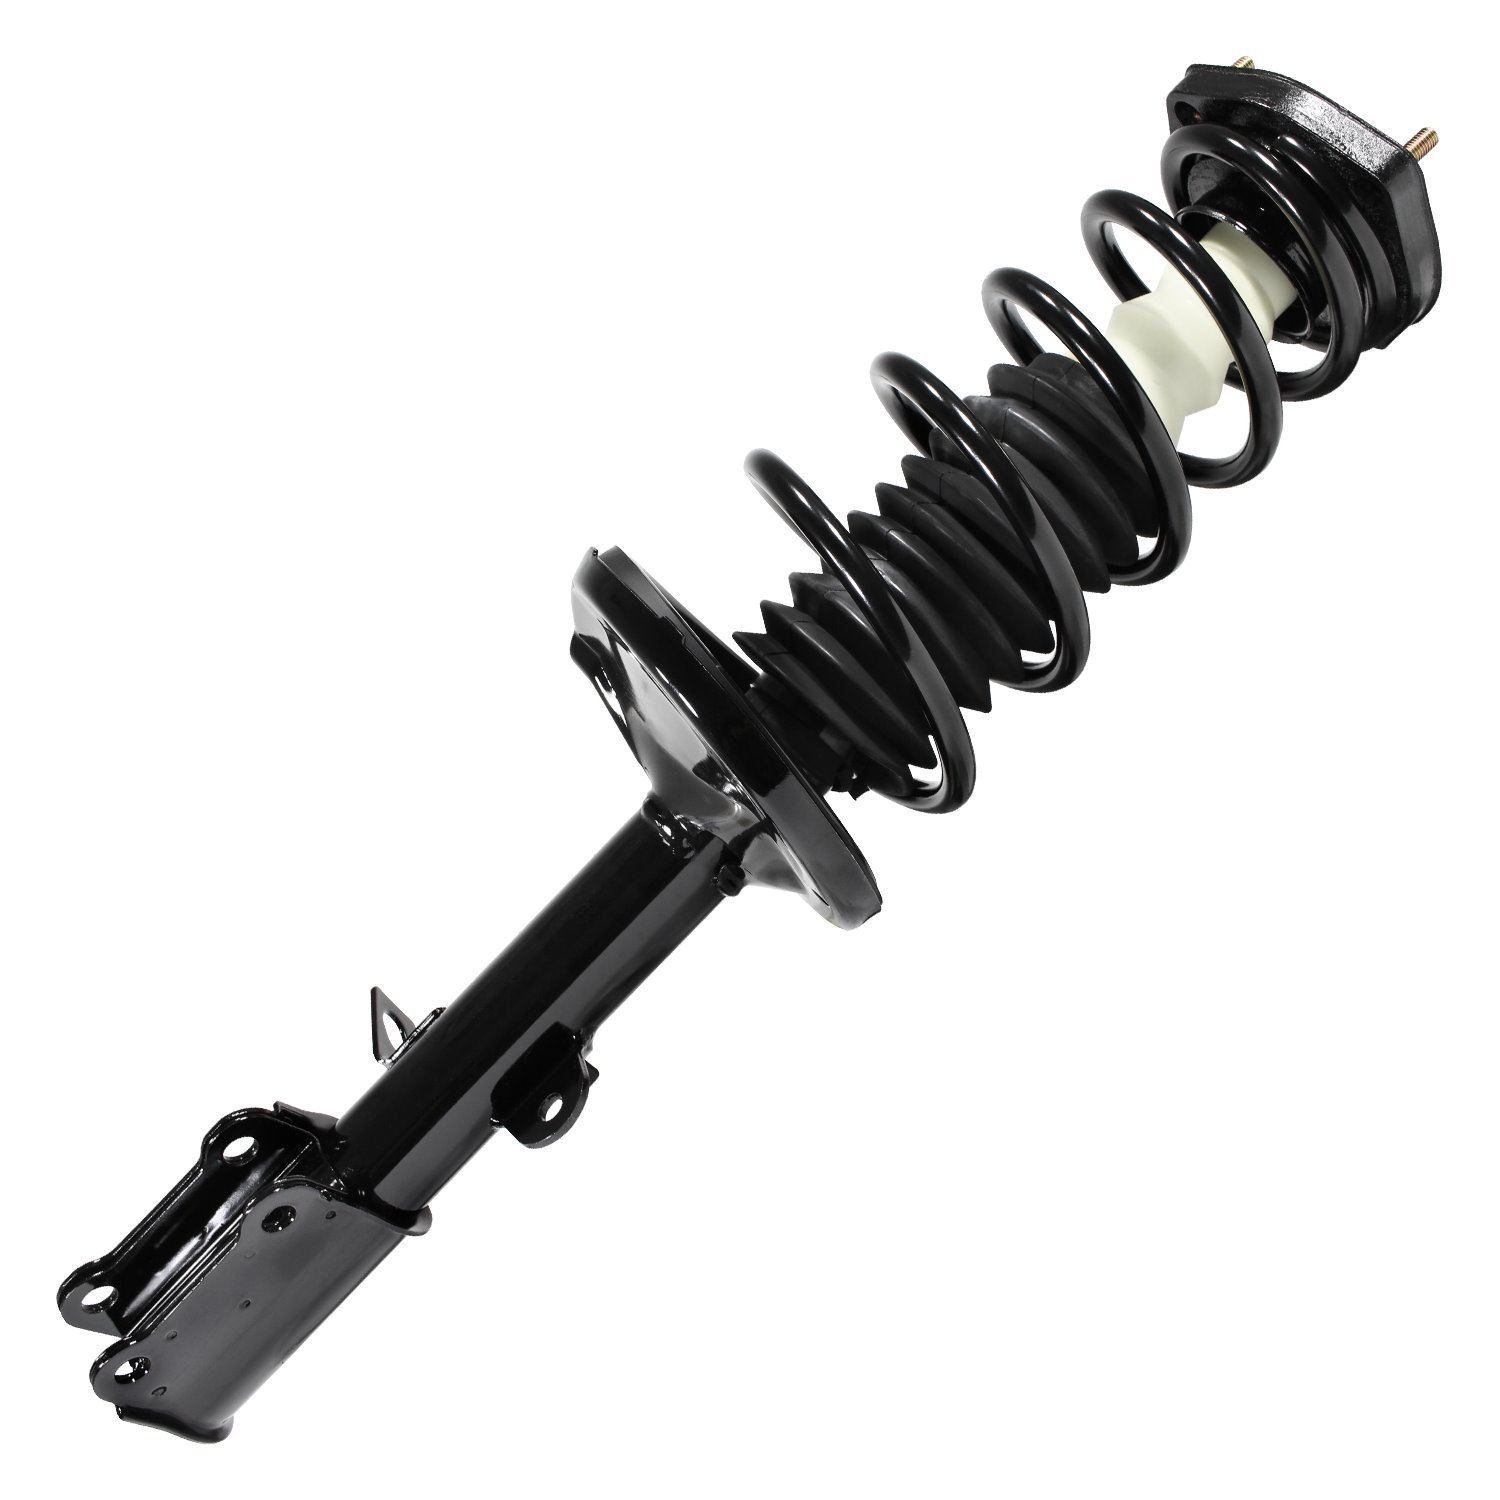 15051 Suspension Strut & Coil Spring Assembly Fits Select Chevy Prizm, Geo Prizm, Toyota Corolla